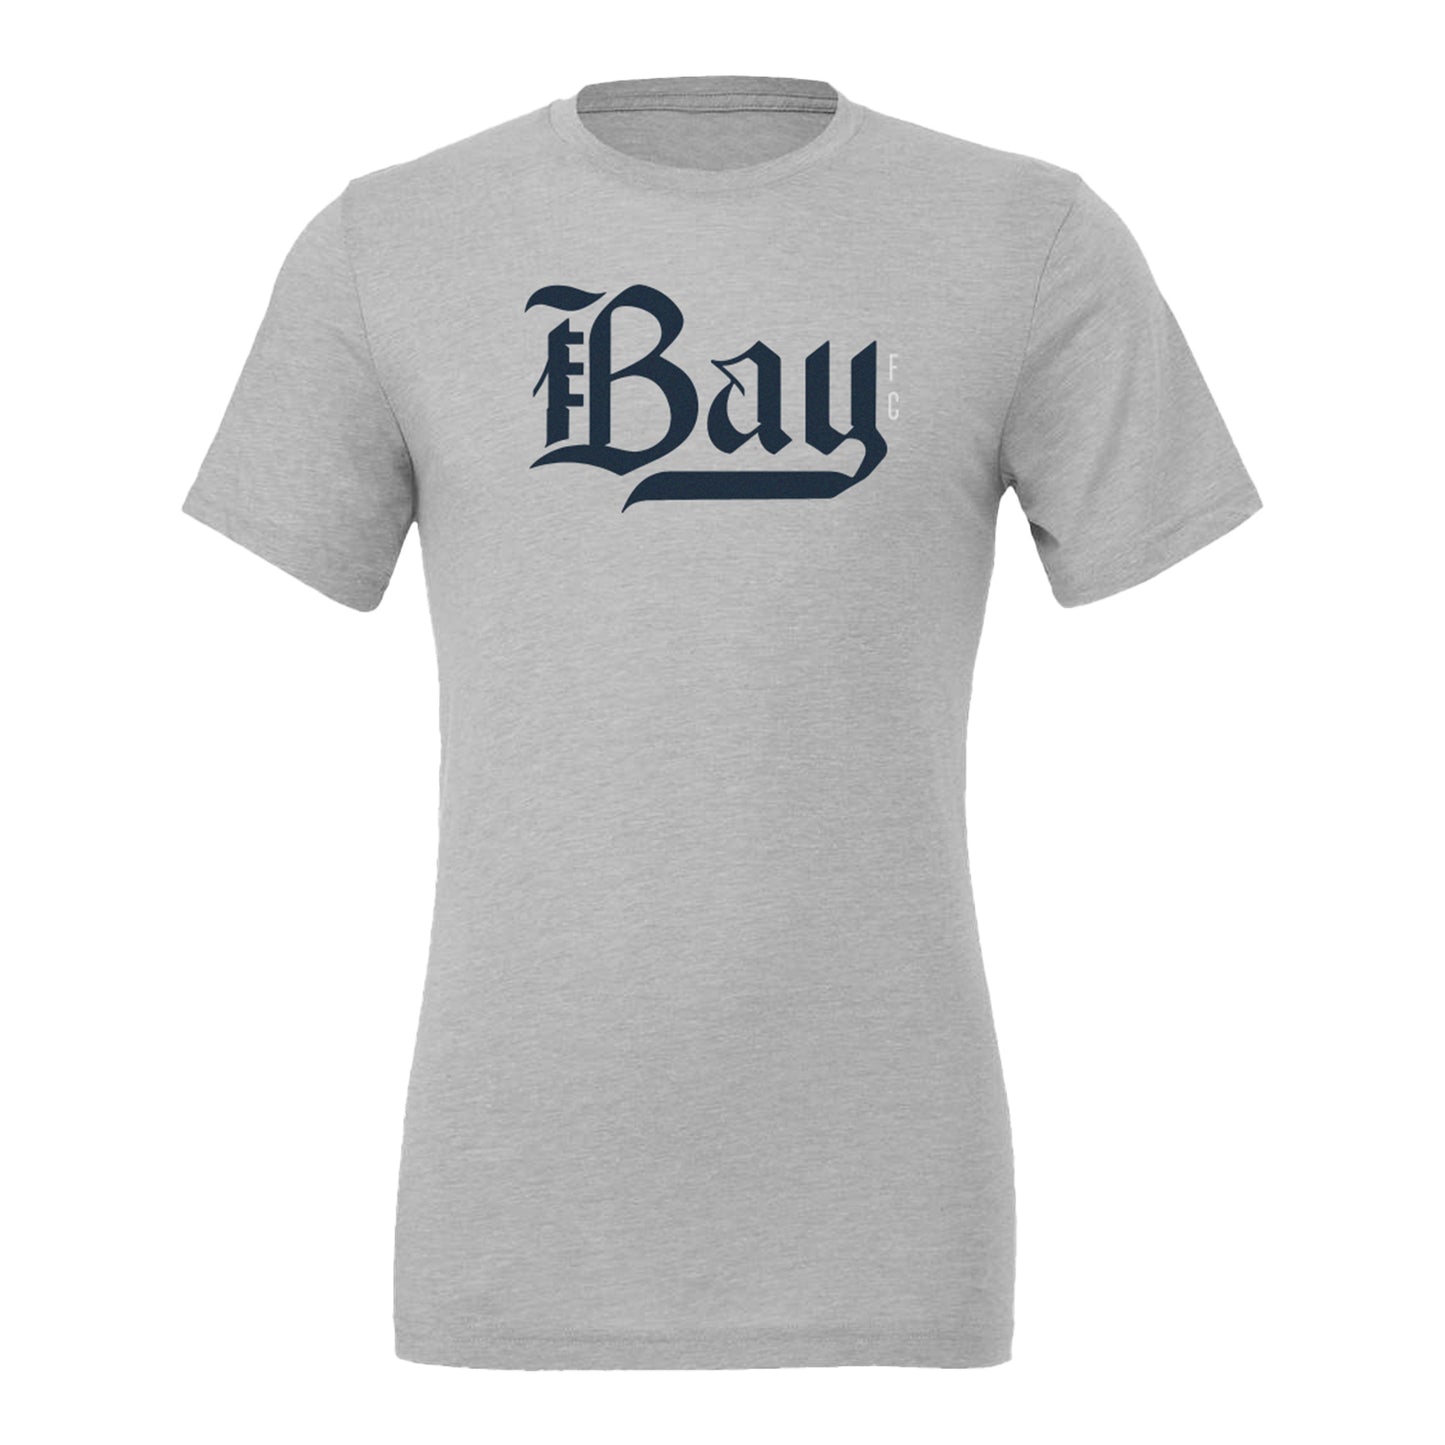 Unisex Bay FC Grey Tee - Front View